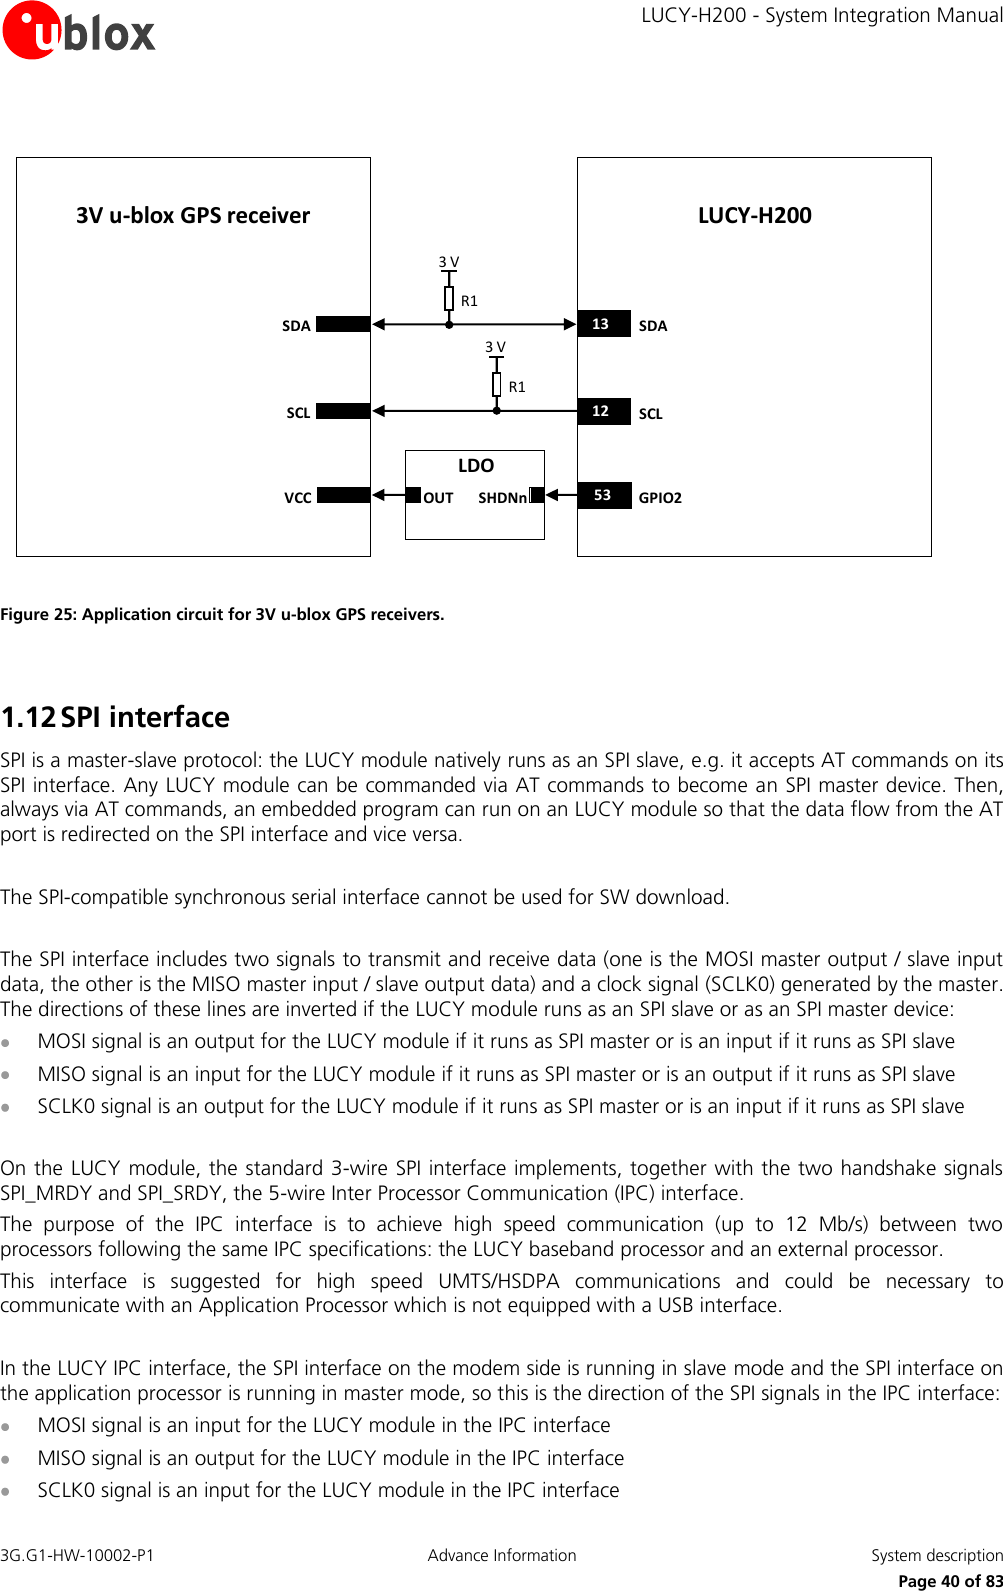     LUCY-H200 - System Integration Manual 3G.G1-HW-10002-P1  Advance Information  System description      Page 40 of 83 LUCY-H2003V u-blox GPS receiverSDASCL1312SDASCLR1R13 VVCC 53 GPIO2OUT SHDNnLDO3 V1253 Figure 25: Application circuit for 3V u-blox GPS receivers.  1.12 SPI interface SPI is a master-slave protocol: the LUCY module natively runs as an SPI slave, e.g. it accepts AT commands on its SPI interface. Any LUCY module can be commanded via AT commands to become an SPI master device. Then, always via AT commands, an embedded program can run on an LUCY module so that the data flow from the AT port is redirected on the SPI interface and vice versa.  The SPI-compatible synchronous serial interface cannot be used for SW download.  The SPI interface includes two signals to transmit and receive data (one is the MOSI master output / slave input data, the other is the MISO master input / slave output data) and a clock signal (SCLK0) generated by the master. The directions of these lines are inverted if the LUCY module runs as an SPI slave or as an SPI master device:  MOSI signal is an output for the LUCY module if it runs as SPI master or is an input if it runs as SPI slave  MISO signal is an input for the LUCY module if it runs as SPI master or is an output if it runs as SPI slave  SCLK0 signal is an output for the LUCY module if it runs as SPI master or is an input if it runs as SPI slave  On the LUCY module, the standard 3-wire SPI interface implements, together with the two handshake signals SPI_MRDY and SPI_SRDY, the 5-wire Inter Processor Communication (IPC) interface. The  purpose  of  the  IPC  interface  is  to  achieve  high  speed  communication  (up  to  12  Mb/s)  between  two processors following the same IPC specifications: the LUCY baseband processor and an external processor. This  interface  is  suggested  for  high  speed  UMTS/HSDPA  communications  and  could  be  necessary  to communicate with an Application Processor which is not equipped with a USB interface.  In the LUCY IPC interface, the SPI interface on the modem side is running in slave mode and the SPI interface on the application processor is running in master mode, so this is the direction of the SPI signals in the IPC interface:  MOSI signal is an input for the LUCY module in the IPC interface  MISO signal is an output for the LUCY module in the IPC interface  SCLK0 signal is an input for the LUCY module in the IPC interface 